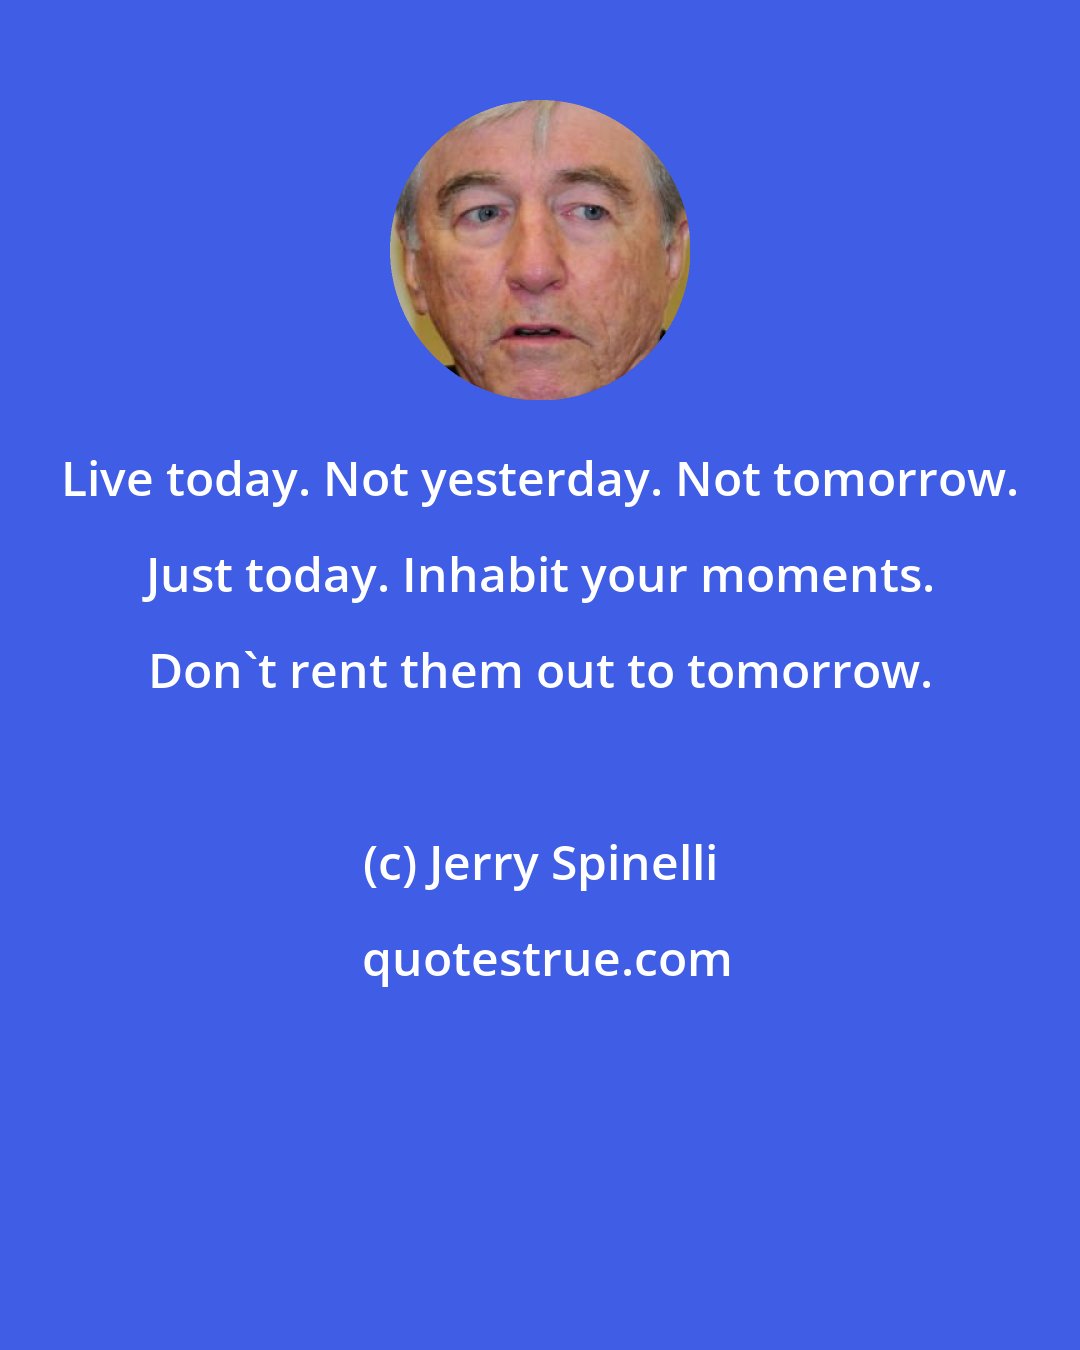 Jerry Spinelli: Live today. Not yesterday. Not tomorrow. Just today. Inhabit your moments. Don't rent them out to tomorrow.